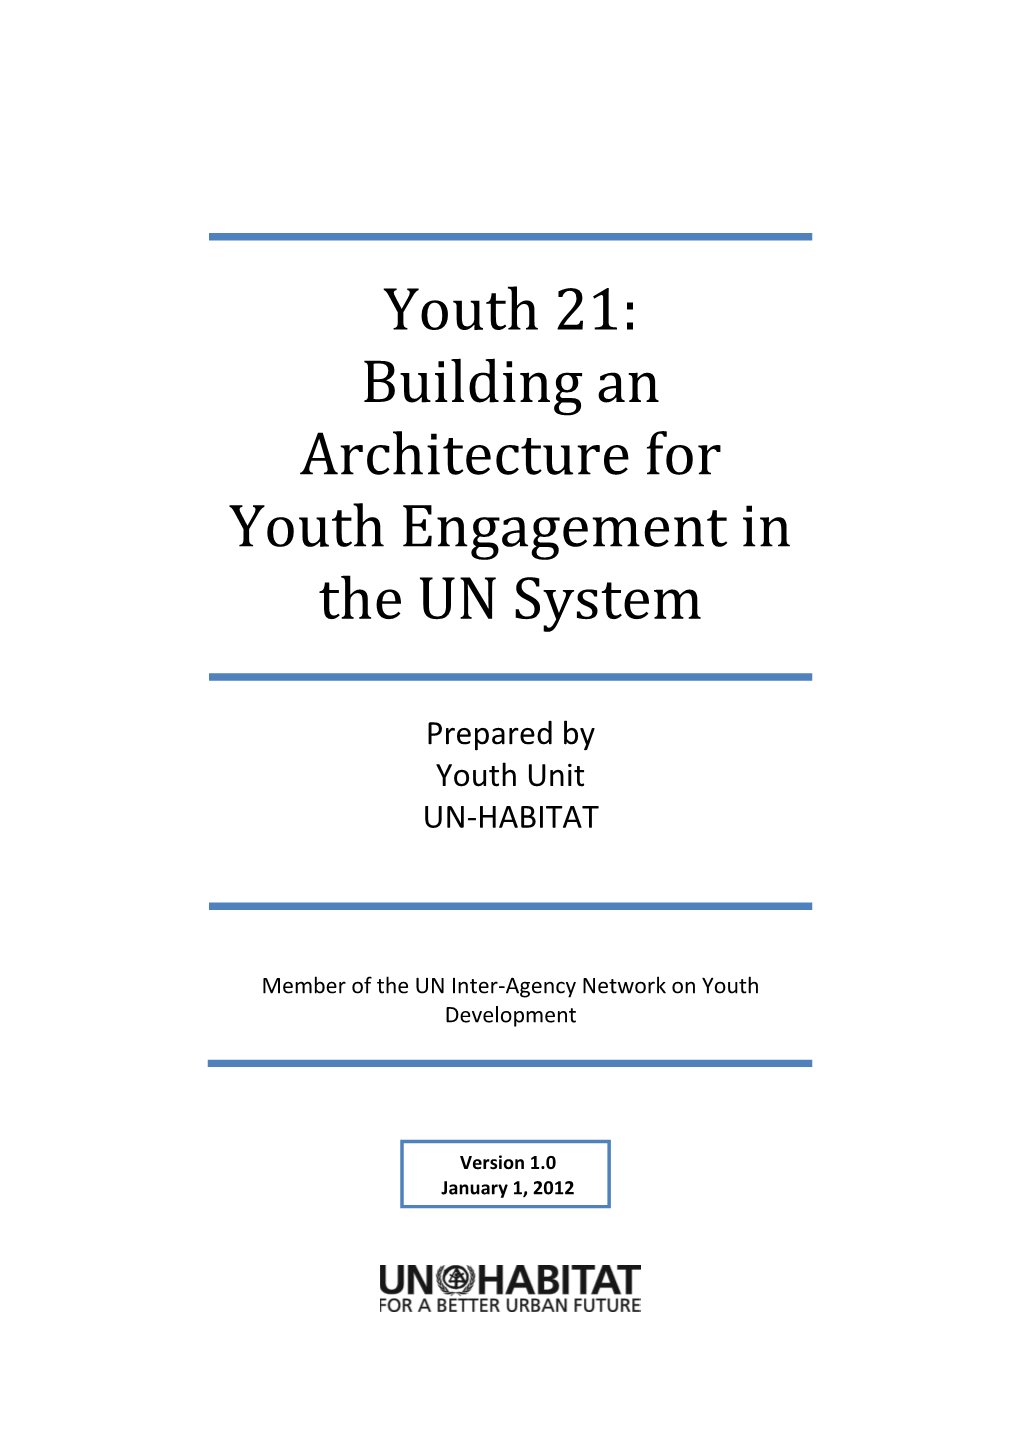 Building an Architecture for Youth Engagement in the UN System